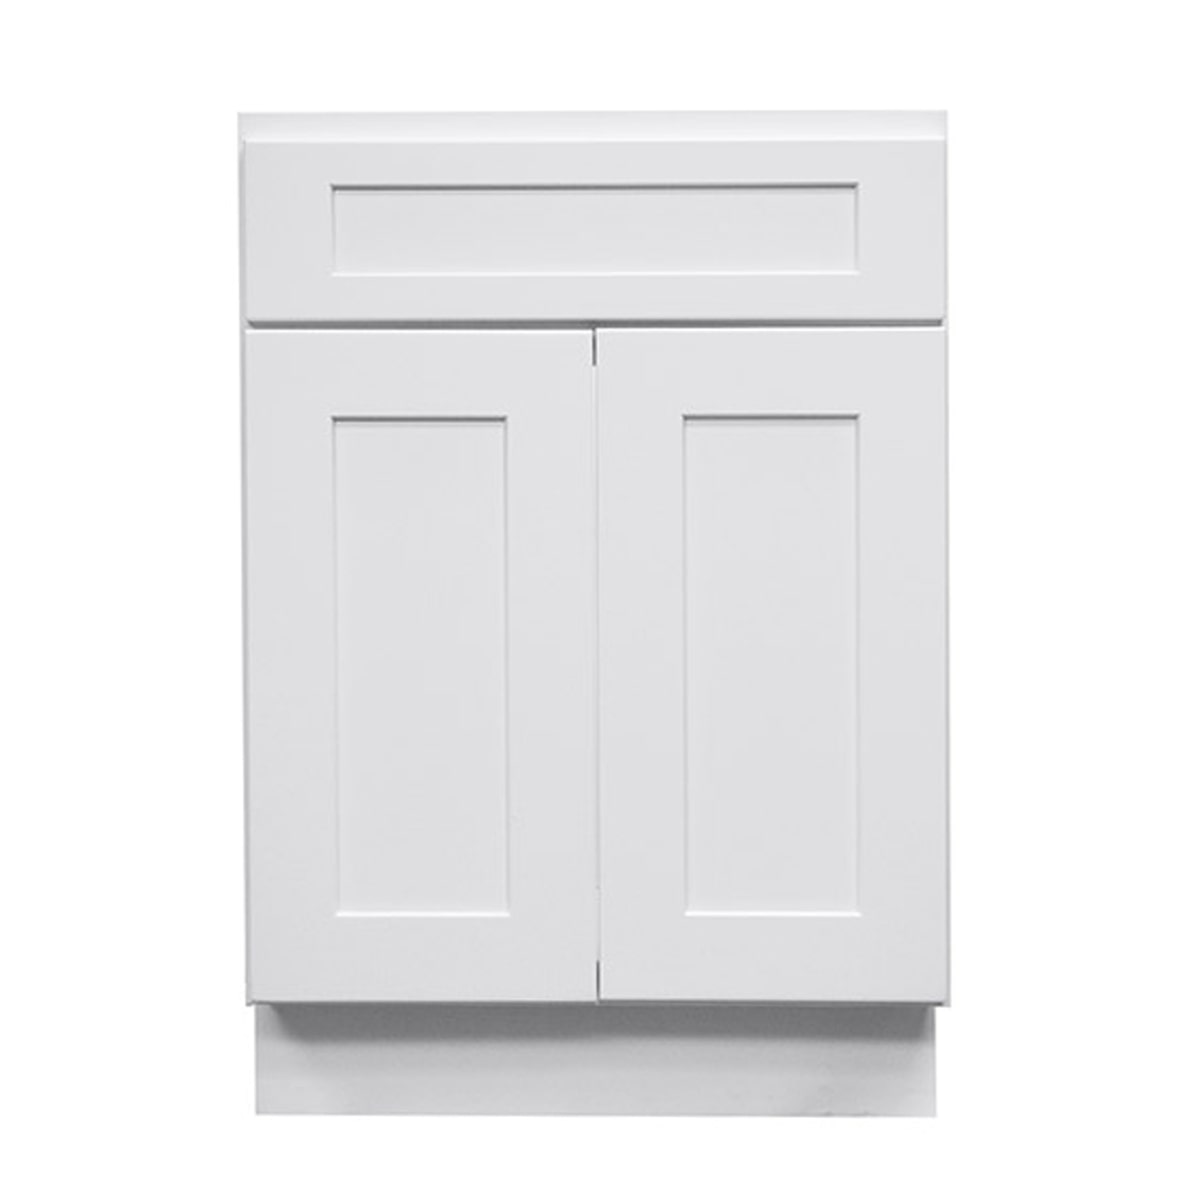 Frosted White Bathroom Vanities